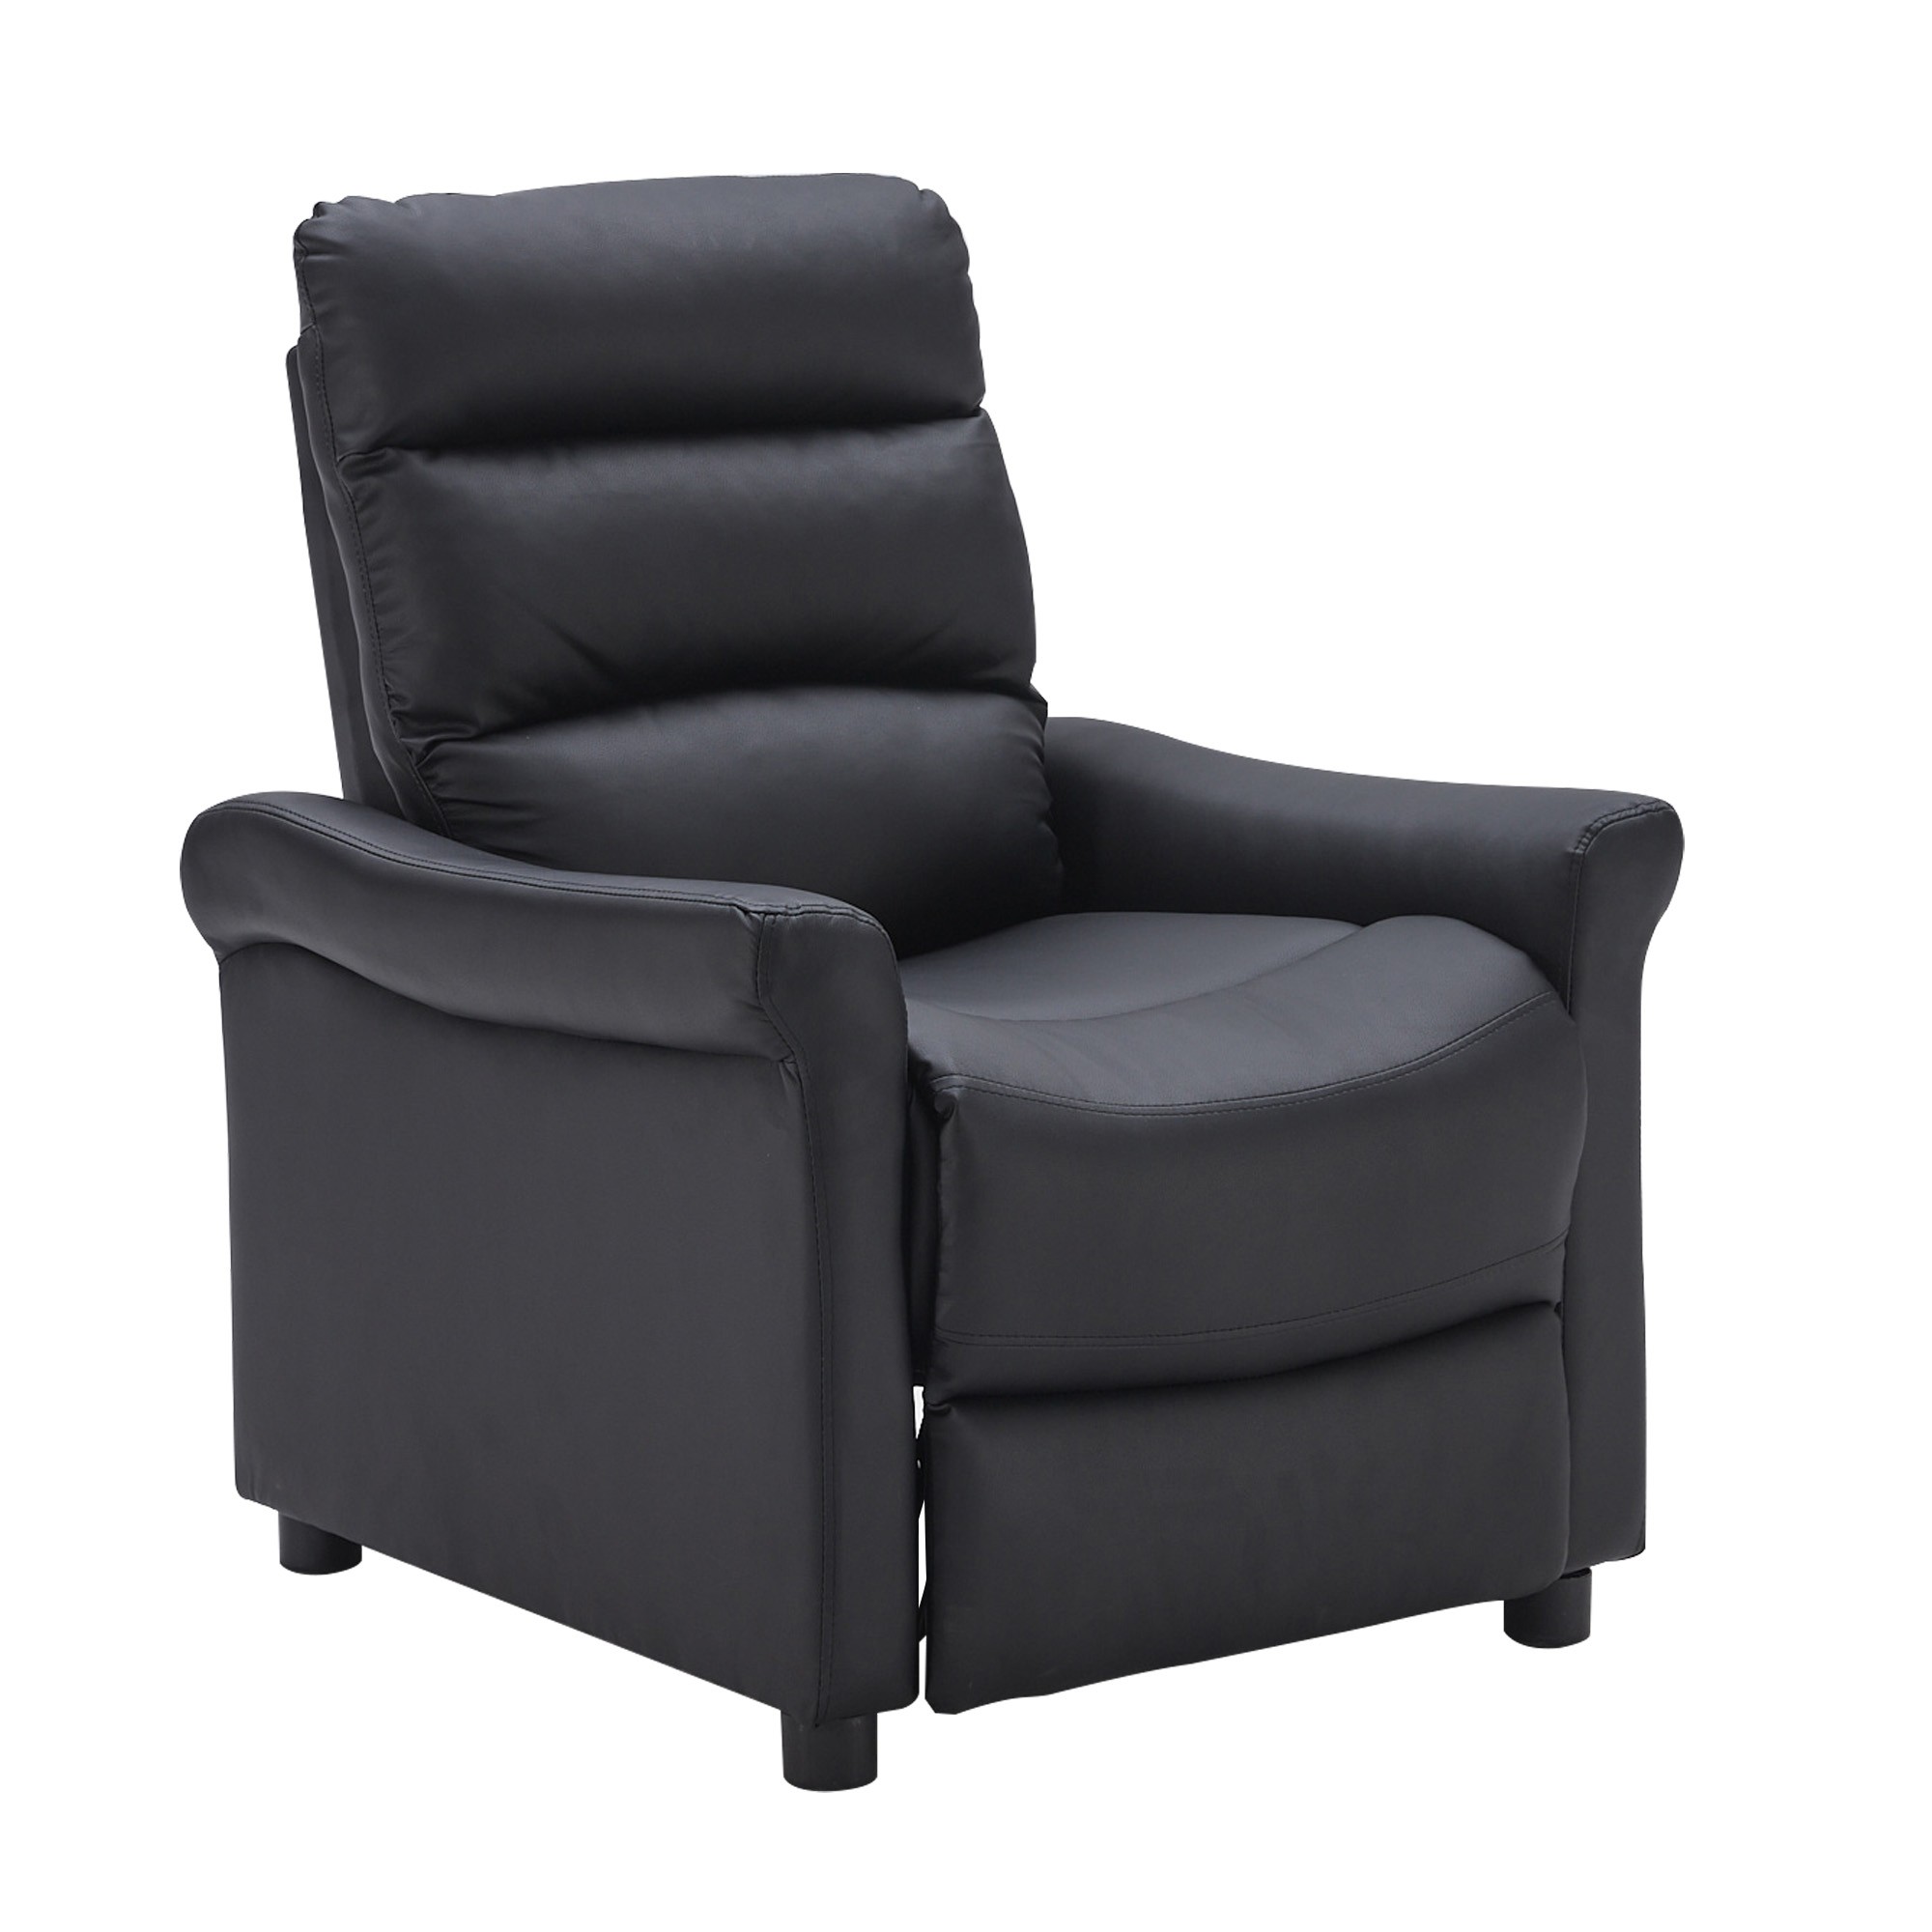 Black Faux Leather Modern Manual Recliner Chair